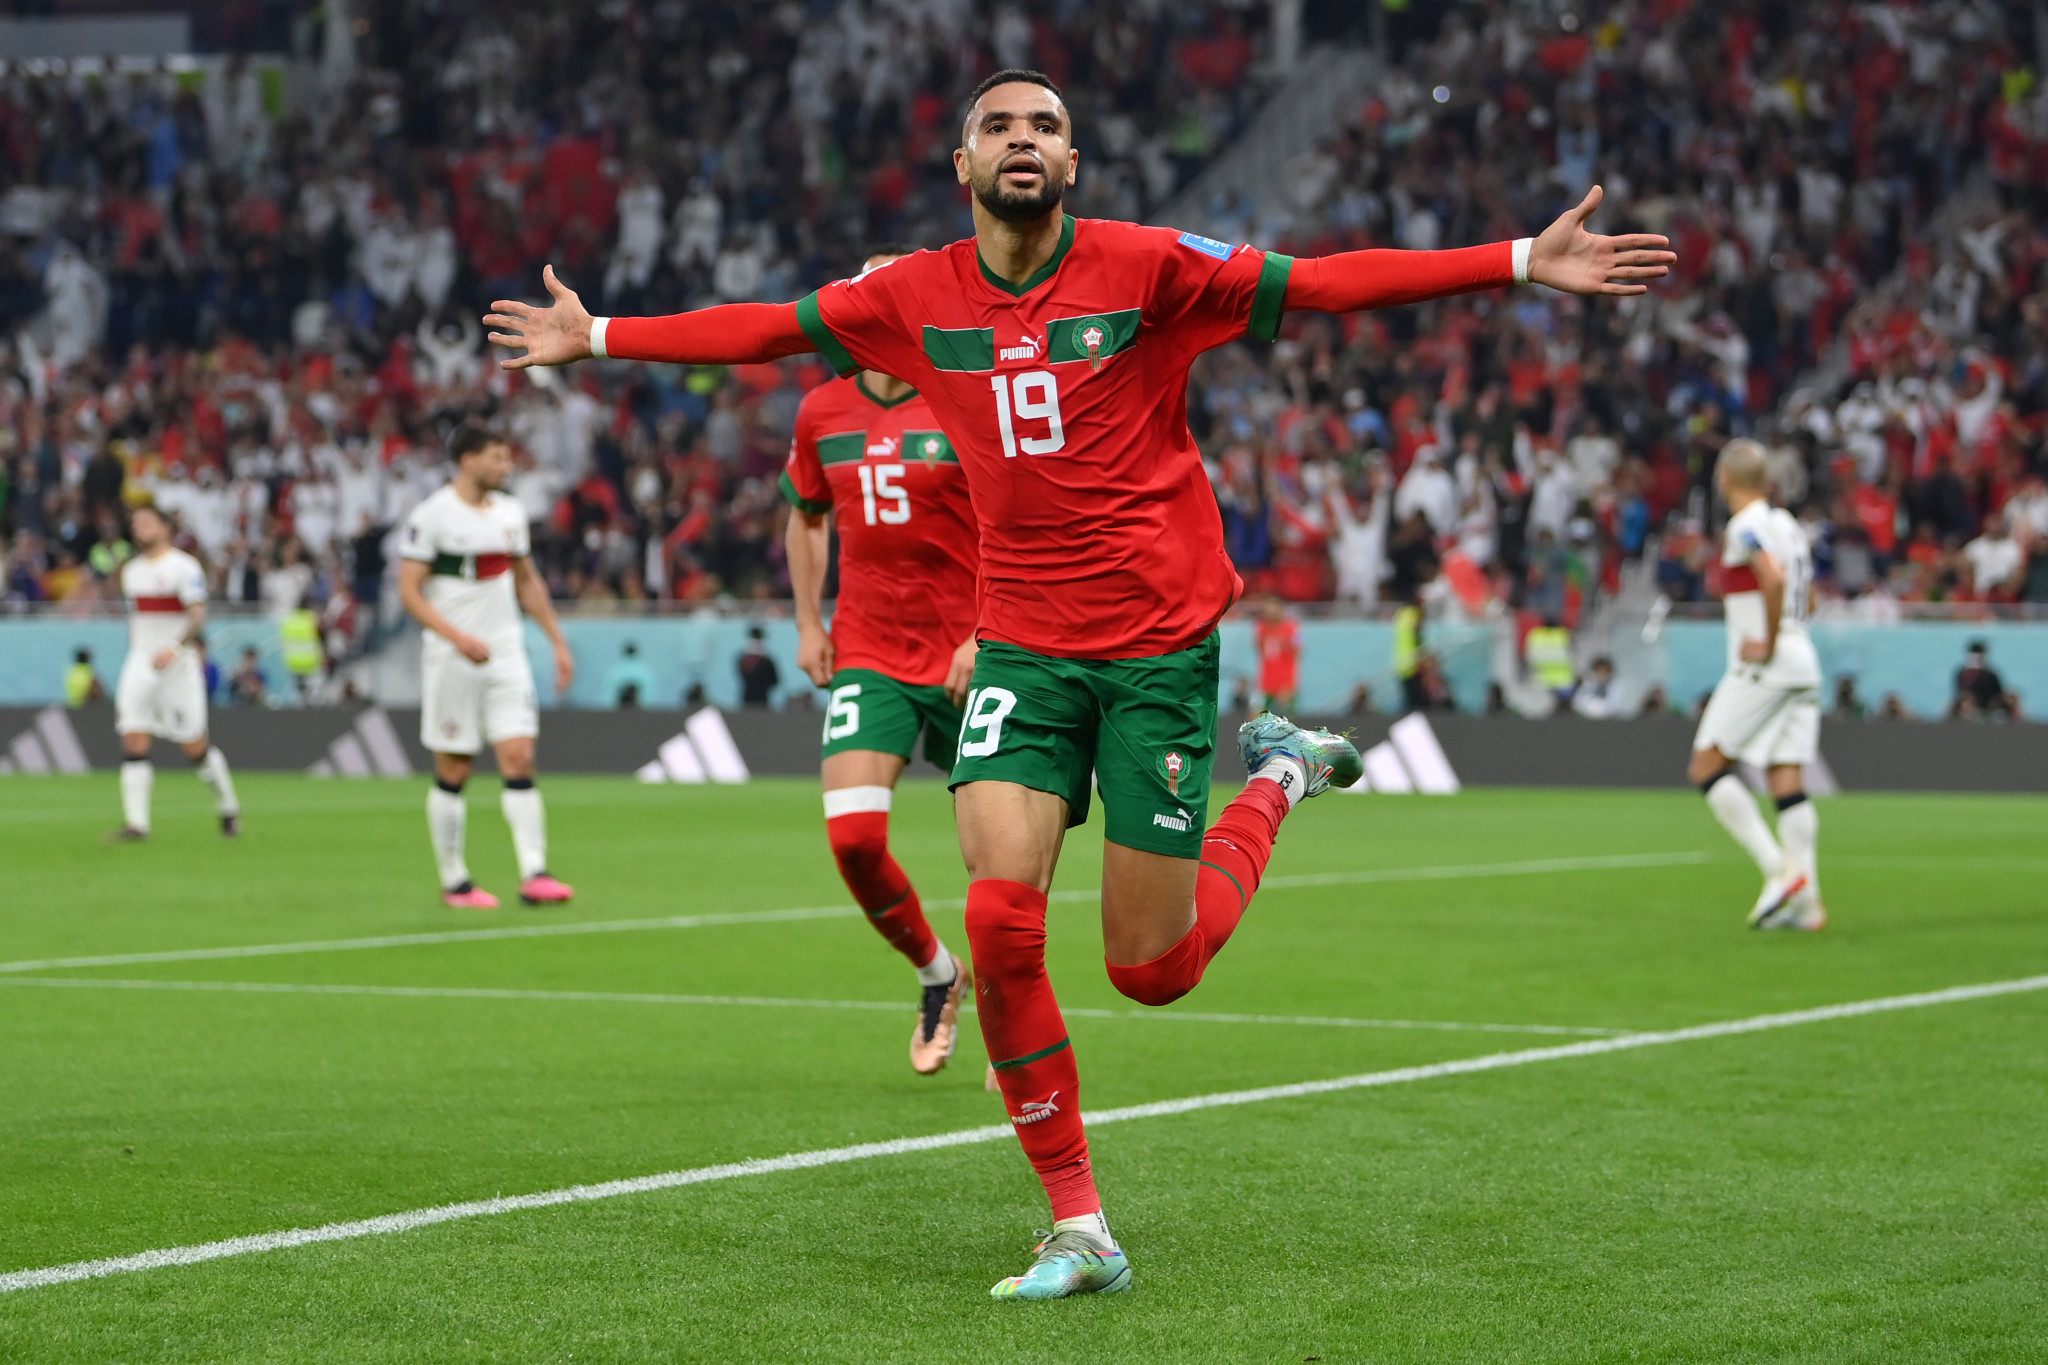 Morocco first-ever African team into World Cup semi-finals and joined by defending champions France